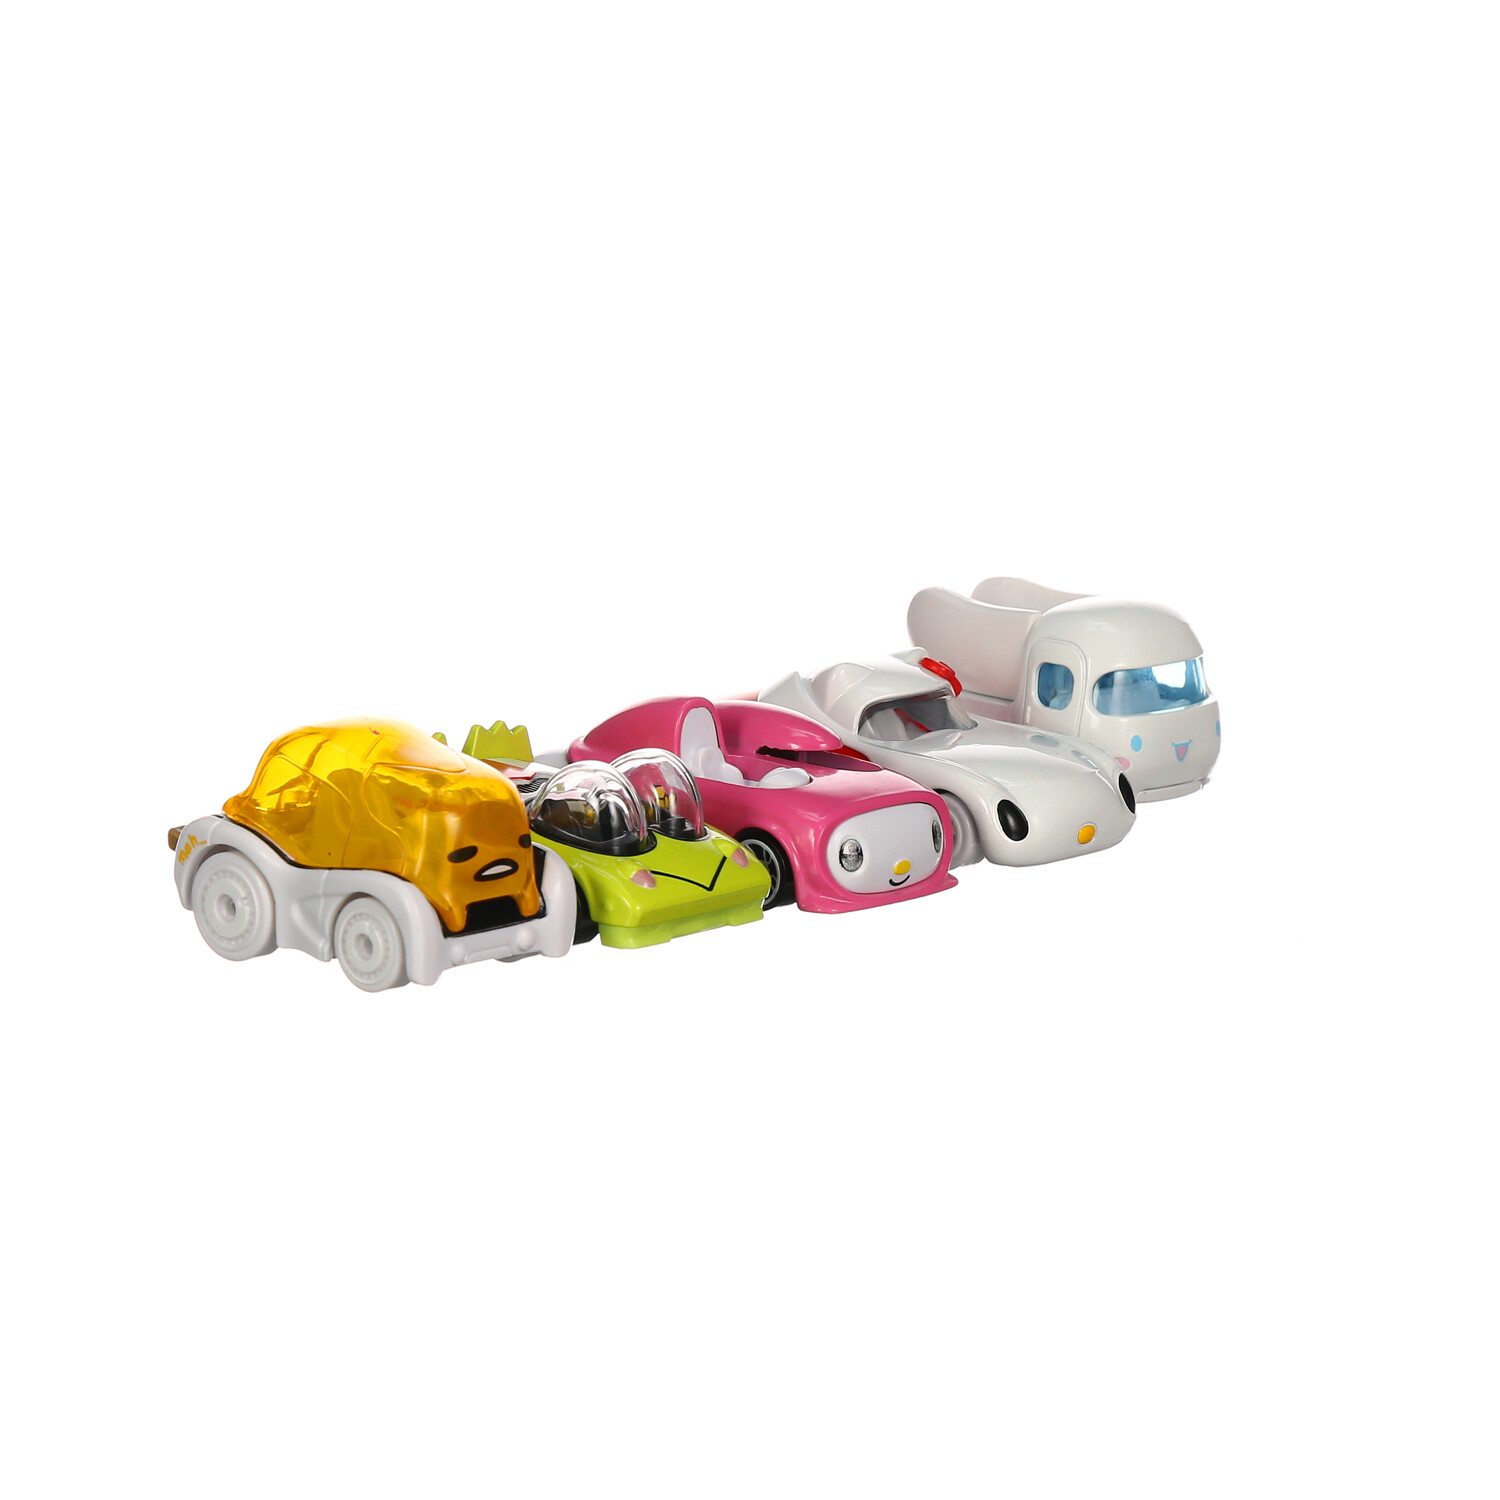 Hot Wheels Sanrio Set of 5 Character Toy Cars, Collectible